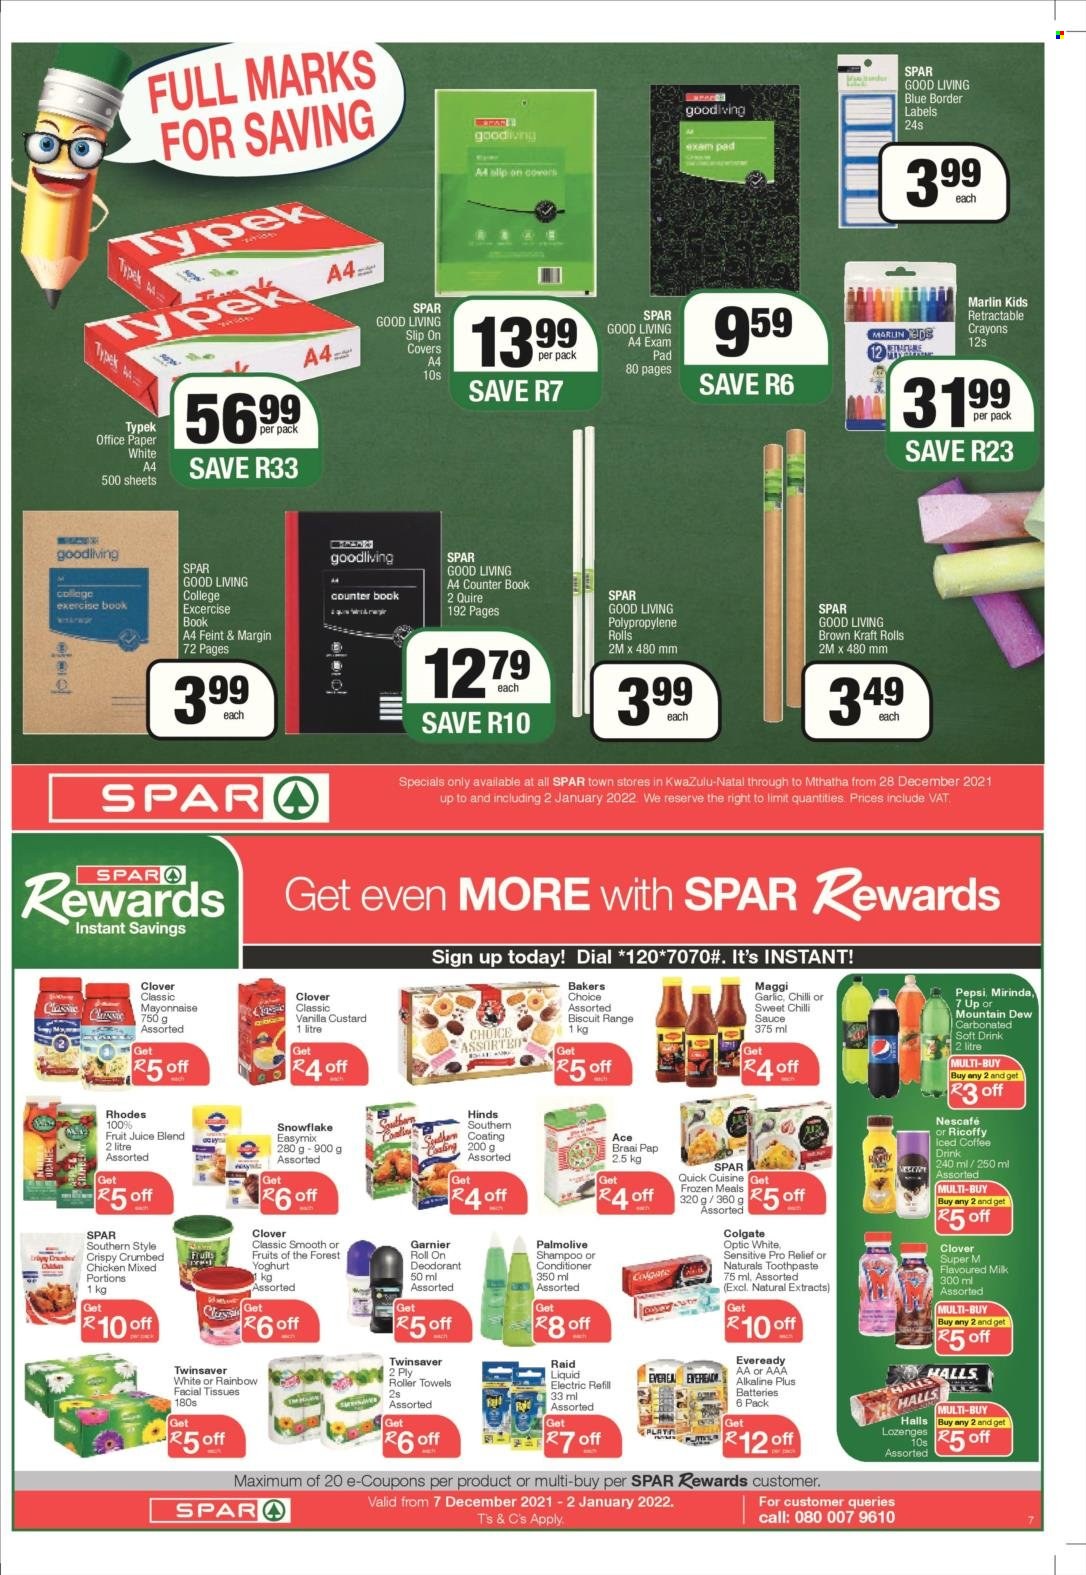 SPAR catalogue  - 28/12/2021 - 02/01/2022 - Sales products - Ace, garlic, marlin, sauce, Kraft®, custard, yoghurt, Clover, milk, flavoured milk, mayonnaise, Halls, biscuit, Maggi, Hinds, chilli sauce, sweet chilli sauce, Mountain Dew, Pepsi, fruit juice, juice, soft drink, 7UP, iced coffee, carbonated soft drink, Ricoffy, Nescafé, tissues, shampoo, Palmolive, Dial, Colgate, toothpaste, facial tissues, Garnier, conditioner, anti-perspirant, roll-on, deodorant, Raid, Bakers, braai. Page 7.